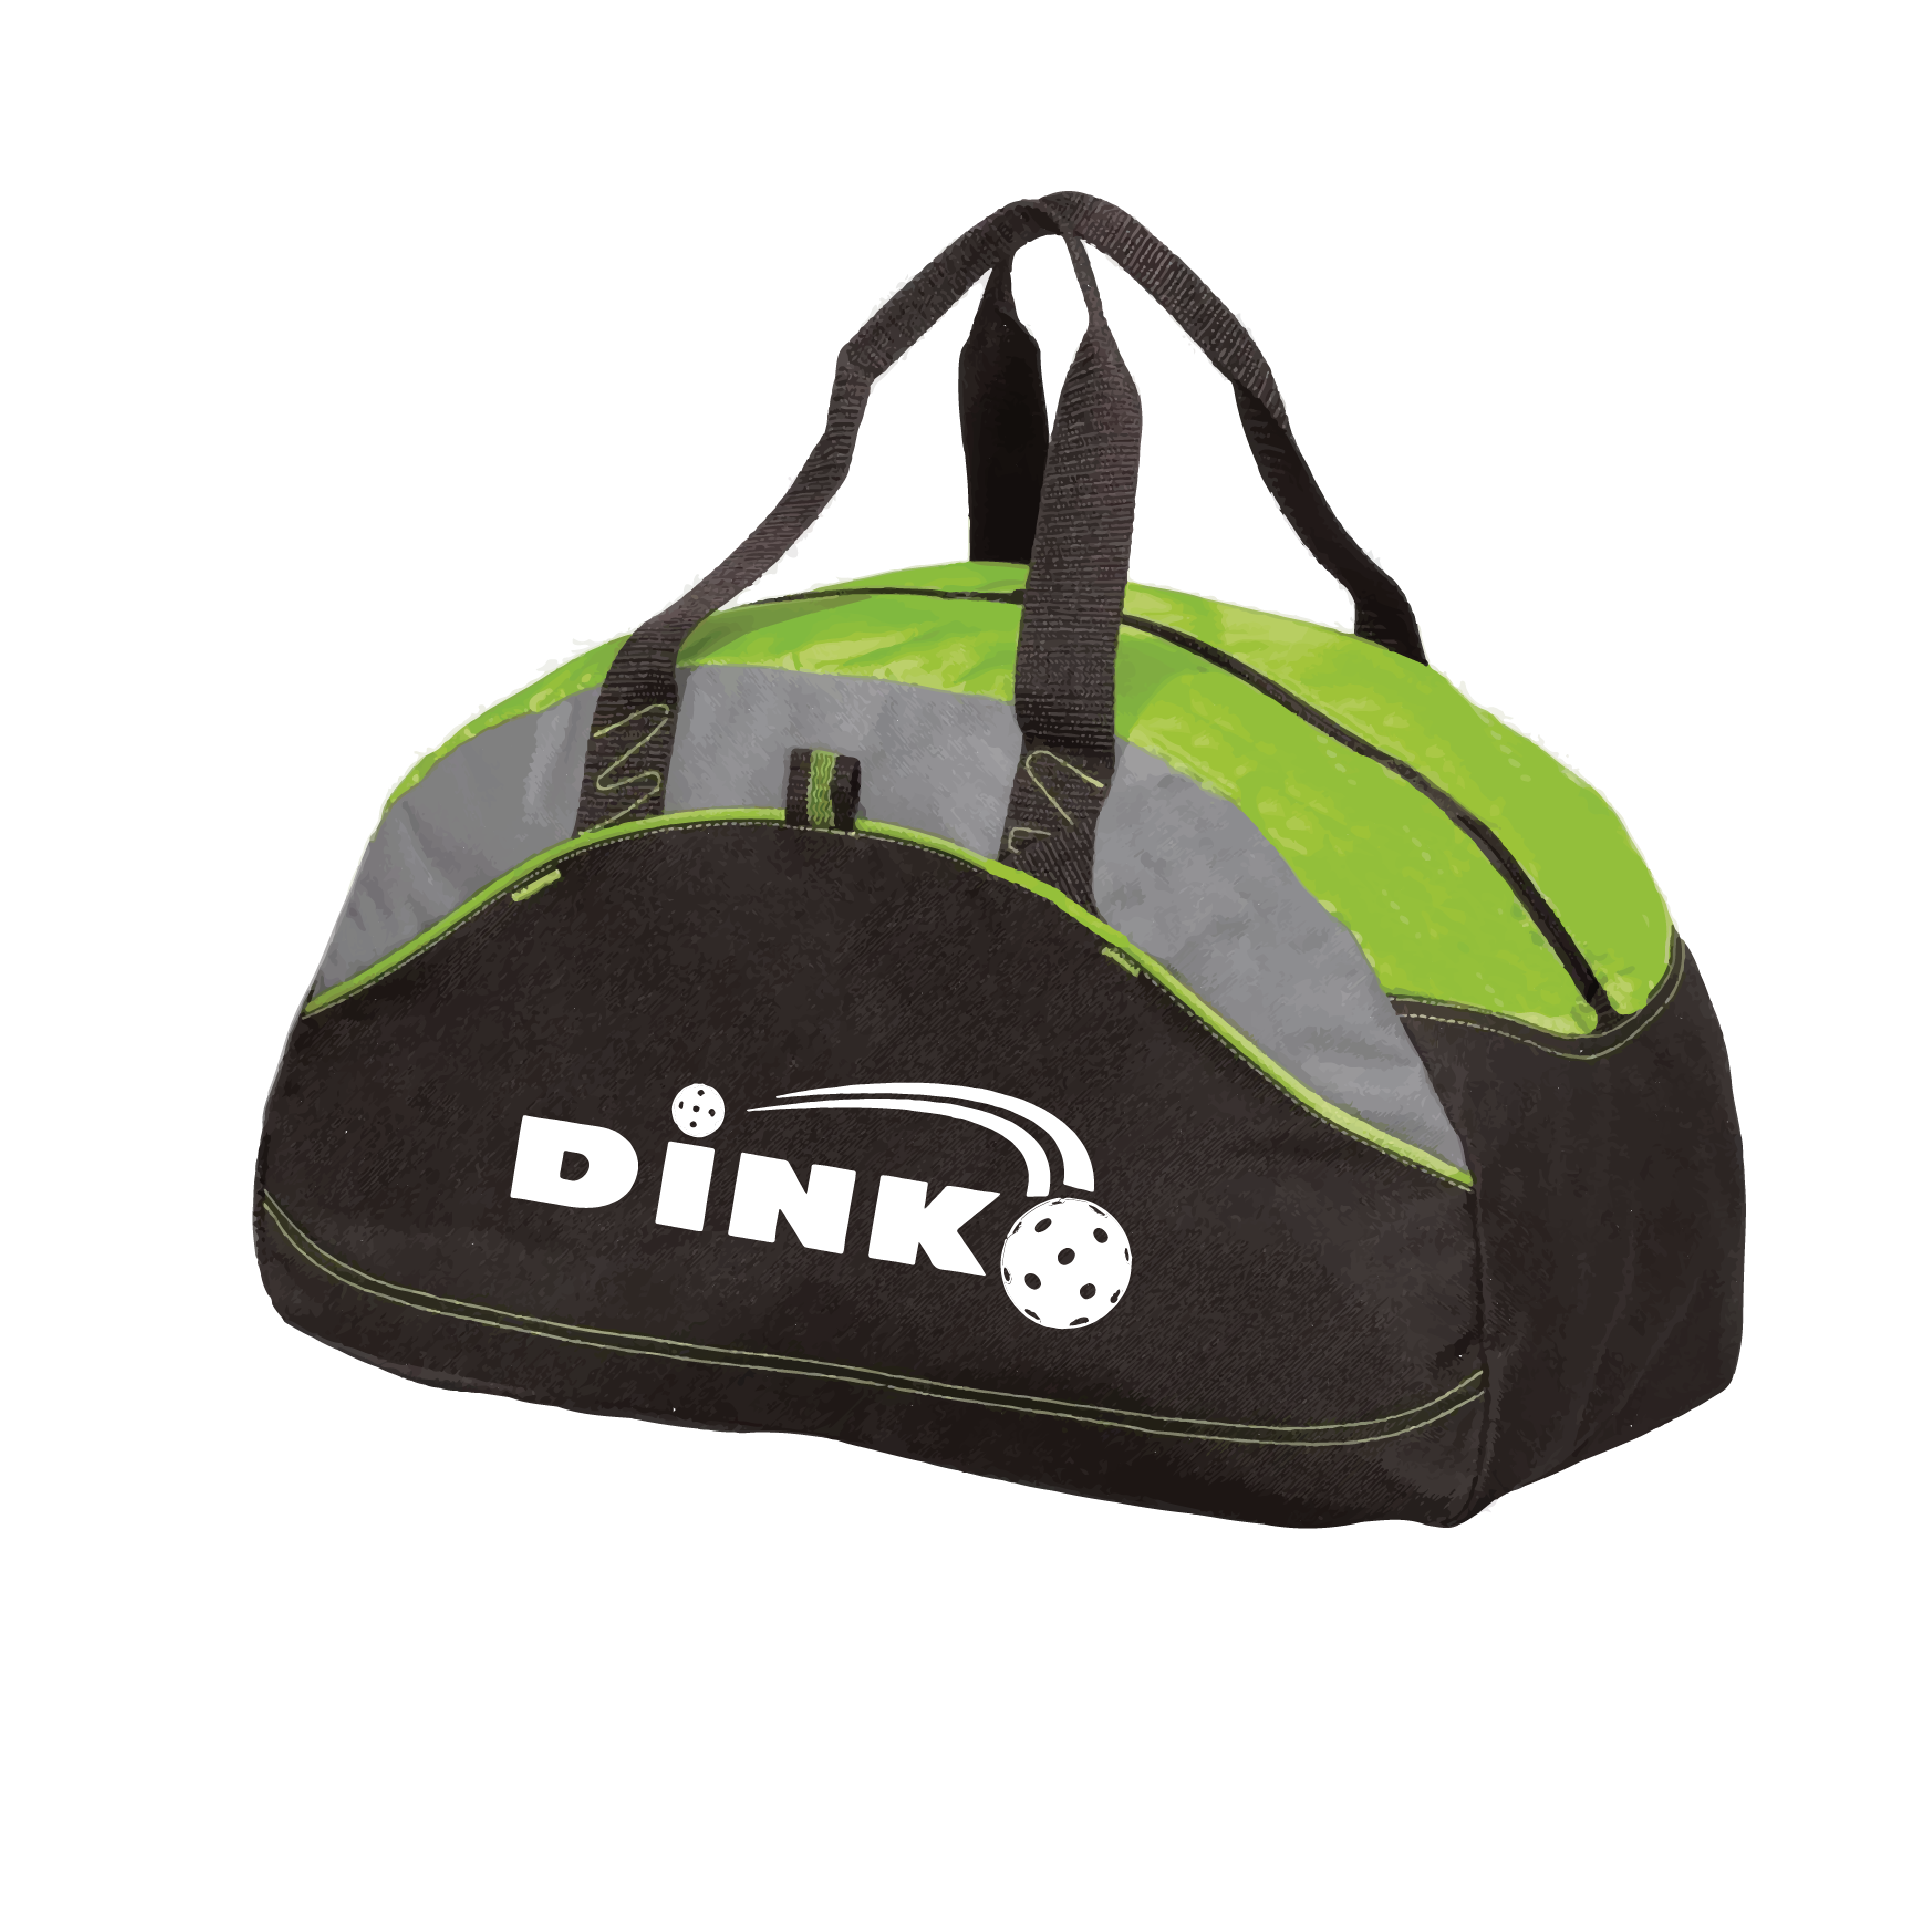 Pickleball Design: Dink  Carry your gear in comfort and style. This fun pickleball duffel bag is the perfect accessory for all pickleball players needing to keep their gear in one place. This medium sized duffel tote is ideal for all your pickleball activities. The large center compartment allows for plenty of space and the mesh end pocket is perfect for holding a water bottle. Duffel bag comes with an adjustable shoulder strap and the polyester material is durable and easily cleaned.